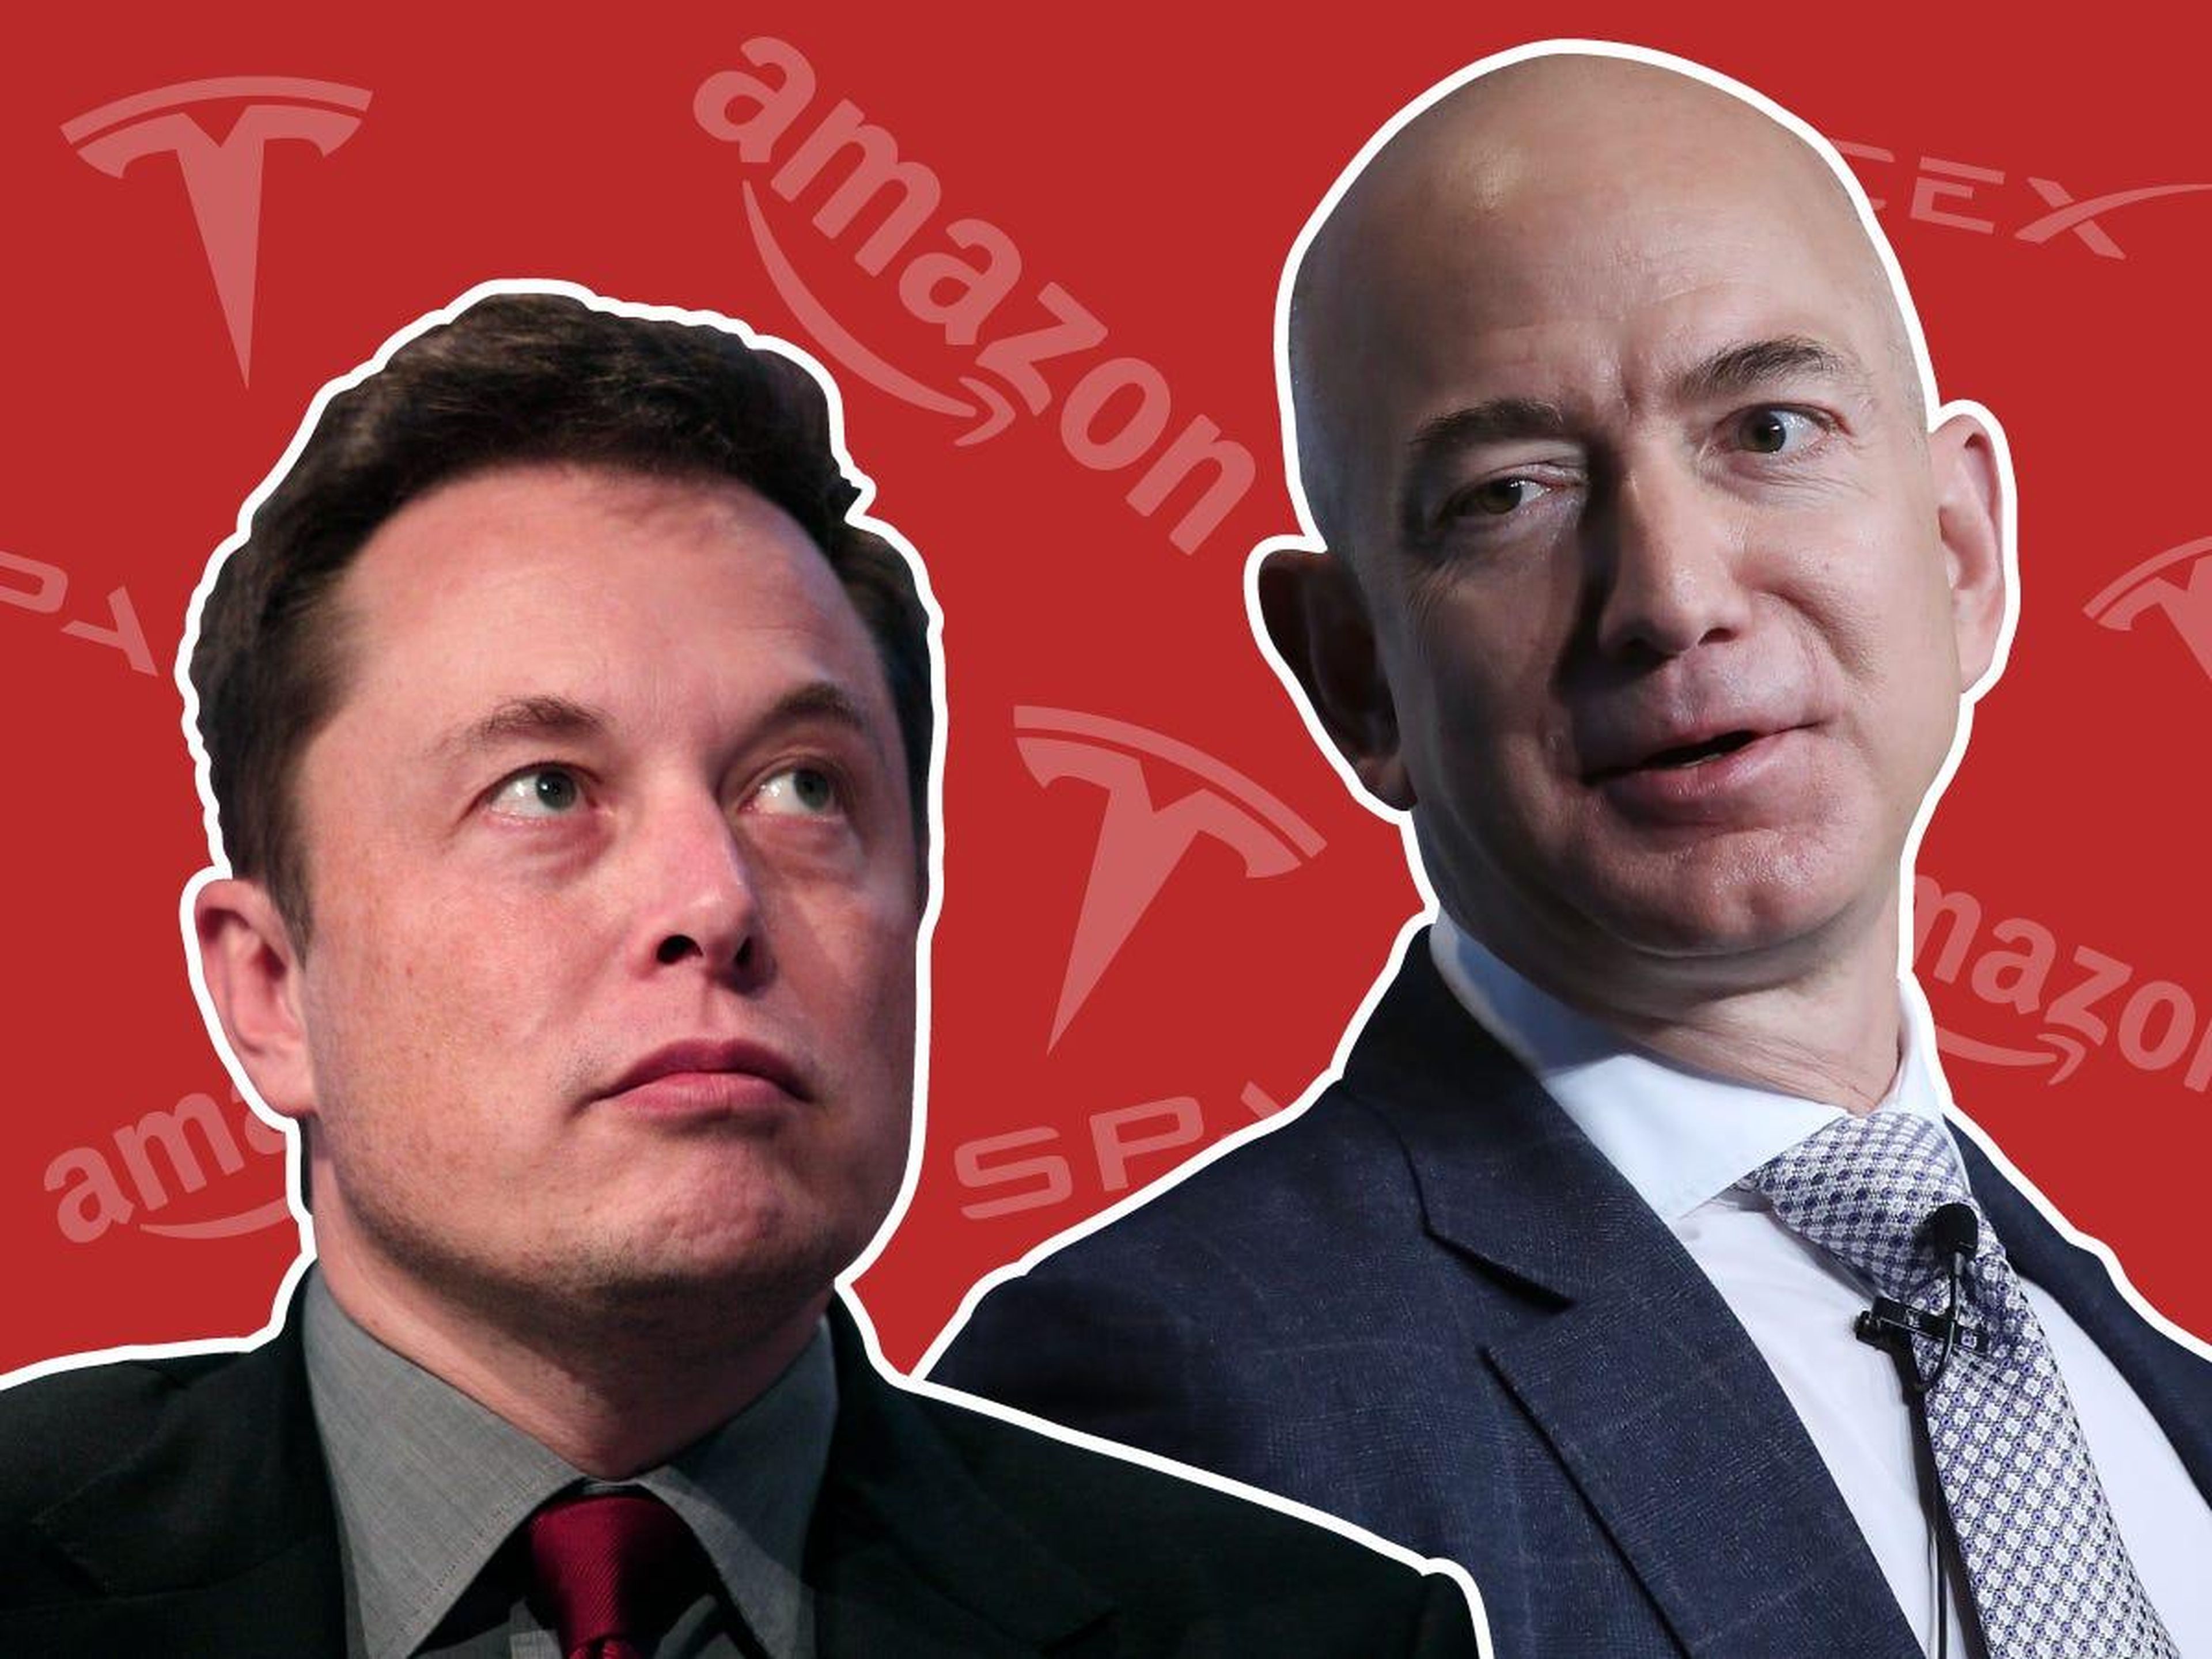 Elon Musk and Jeff Bezos have feuded over their respective space ambitions.